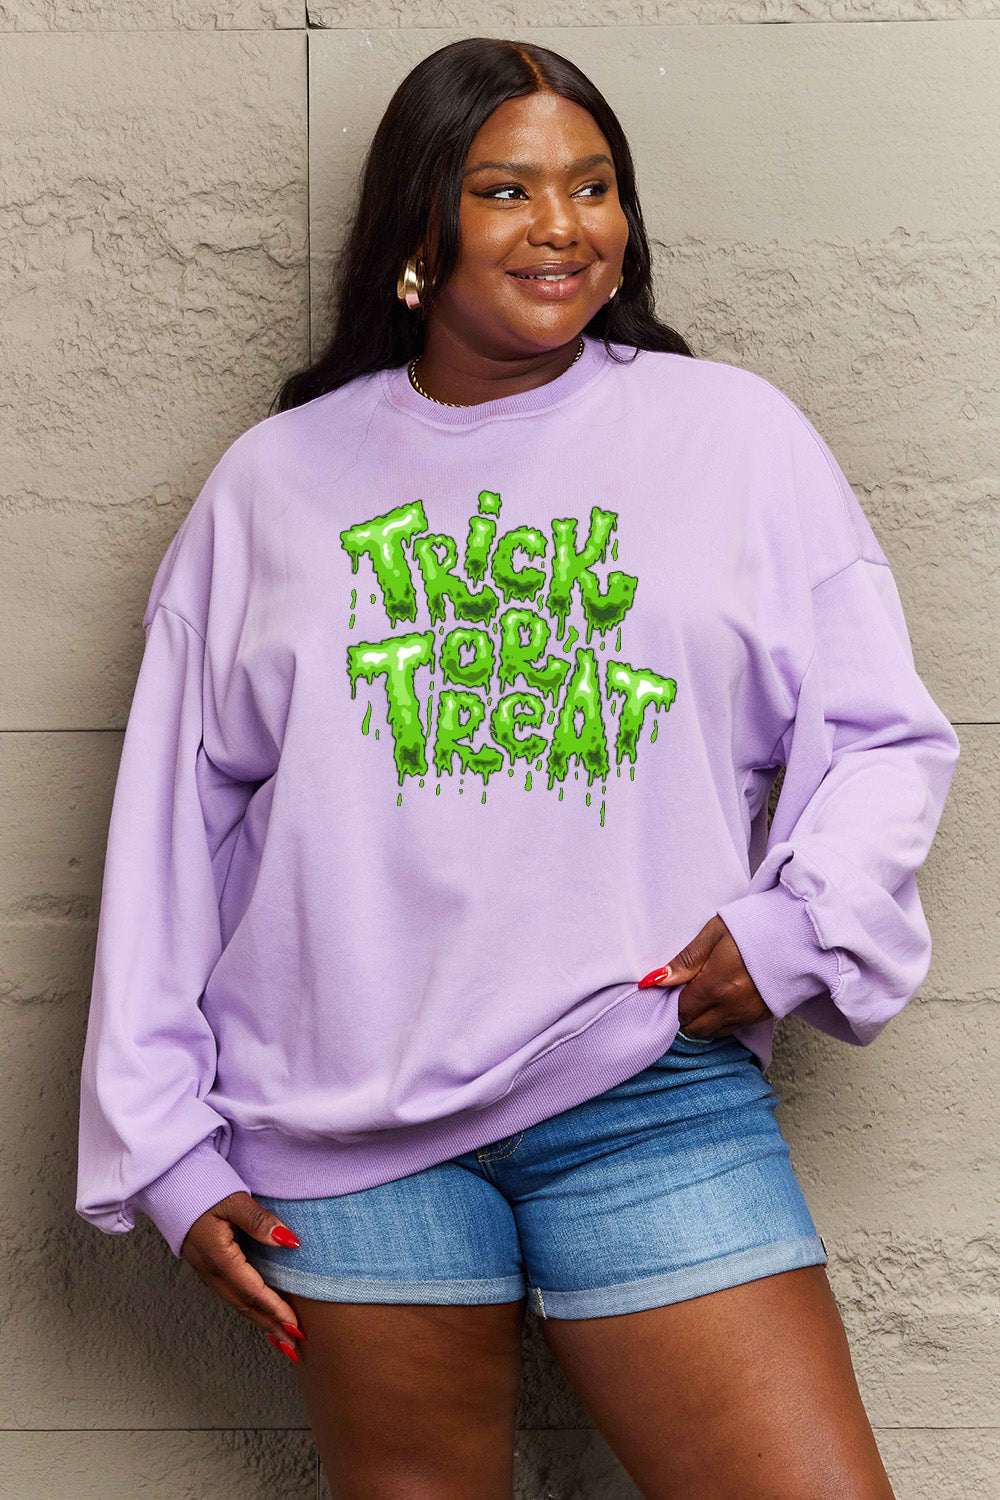 Simply Love Full Size TRICK OR TREAT Graphic Sweatshirt BLUE ZONE PLANET